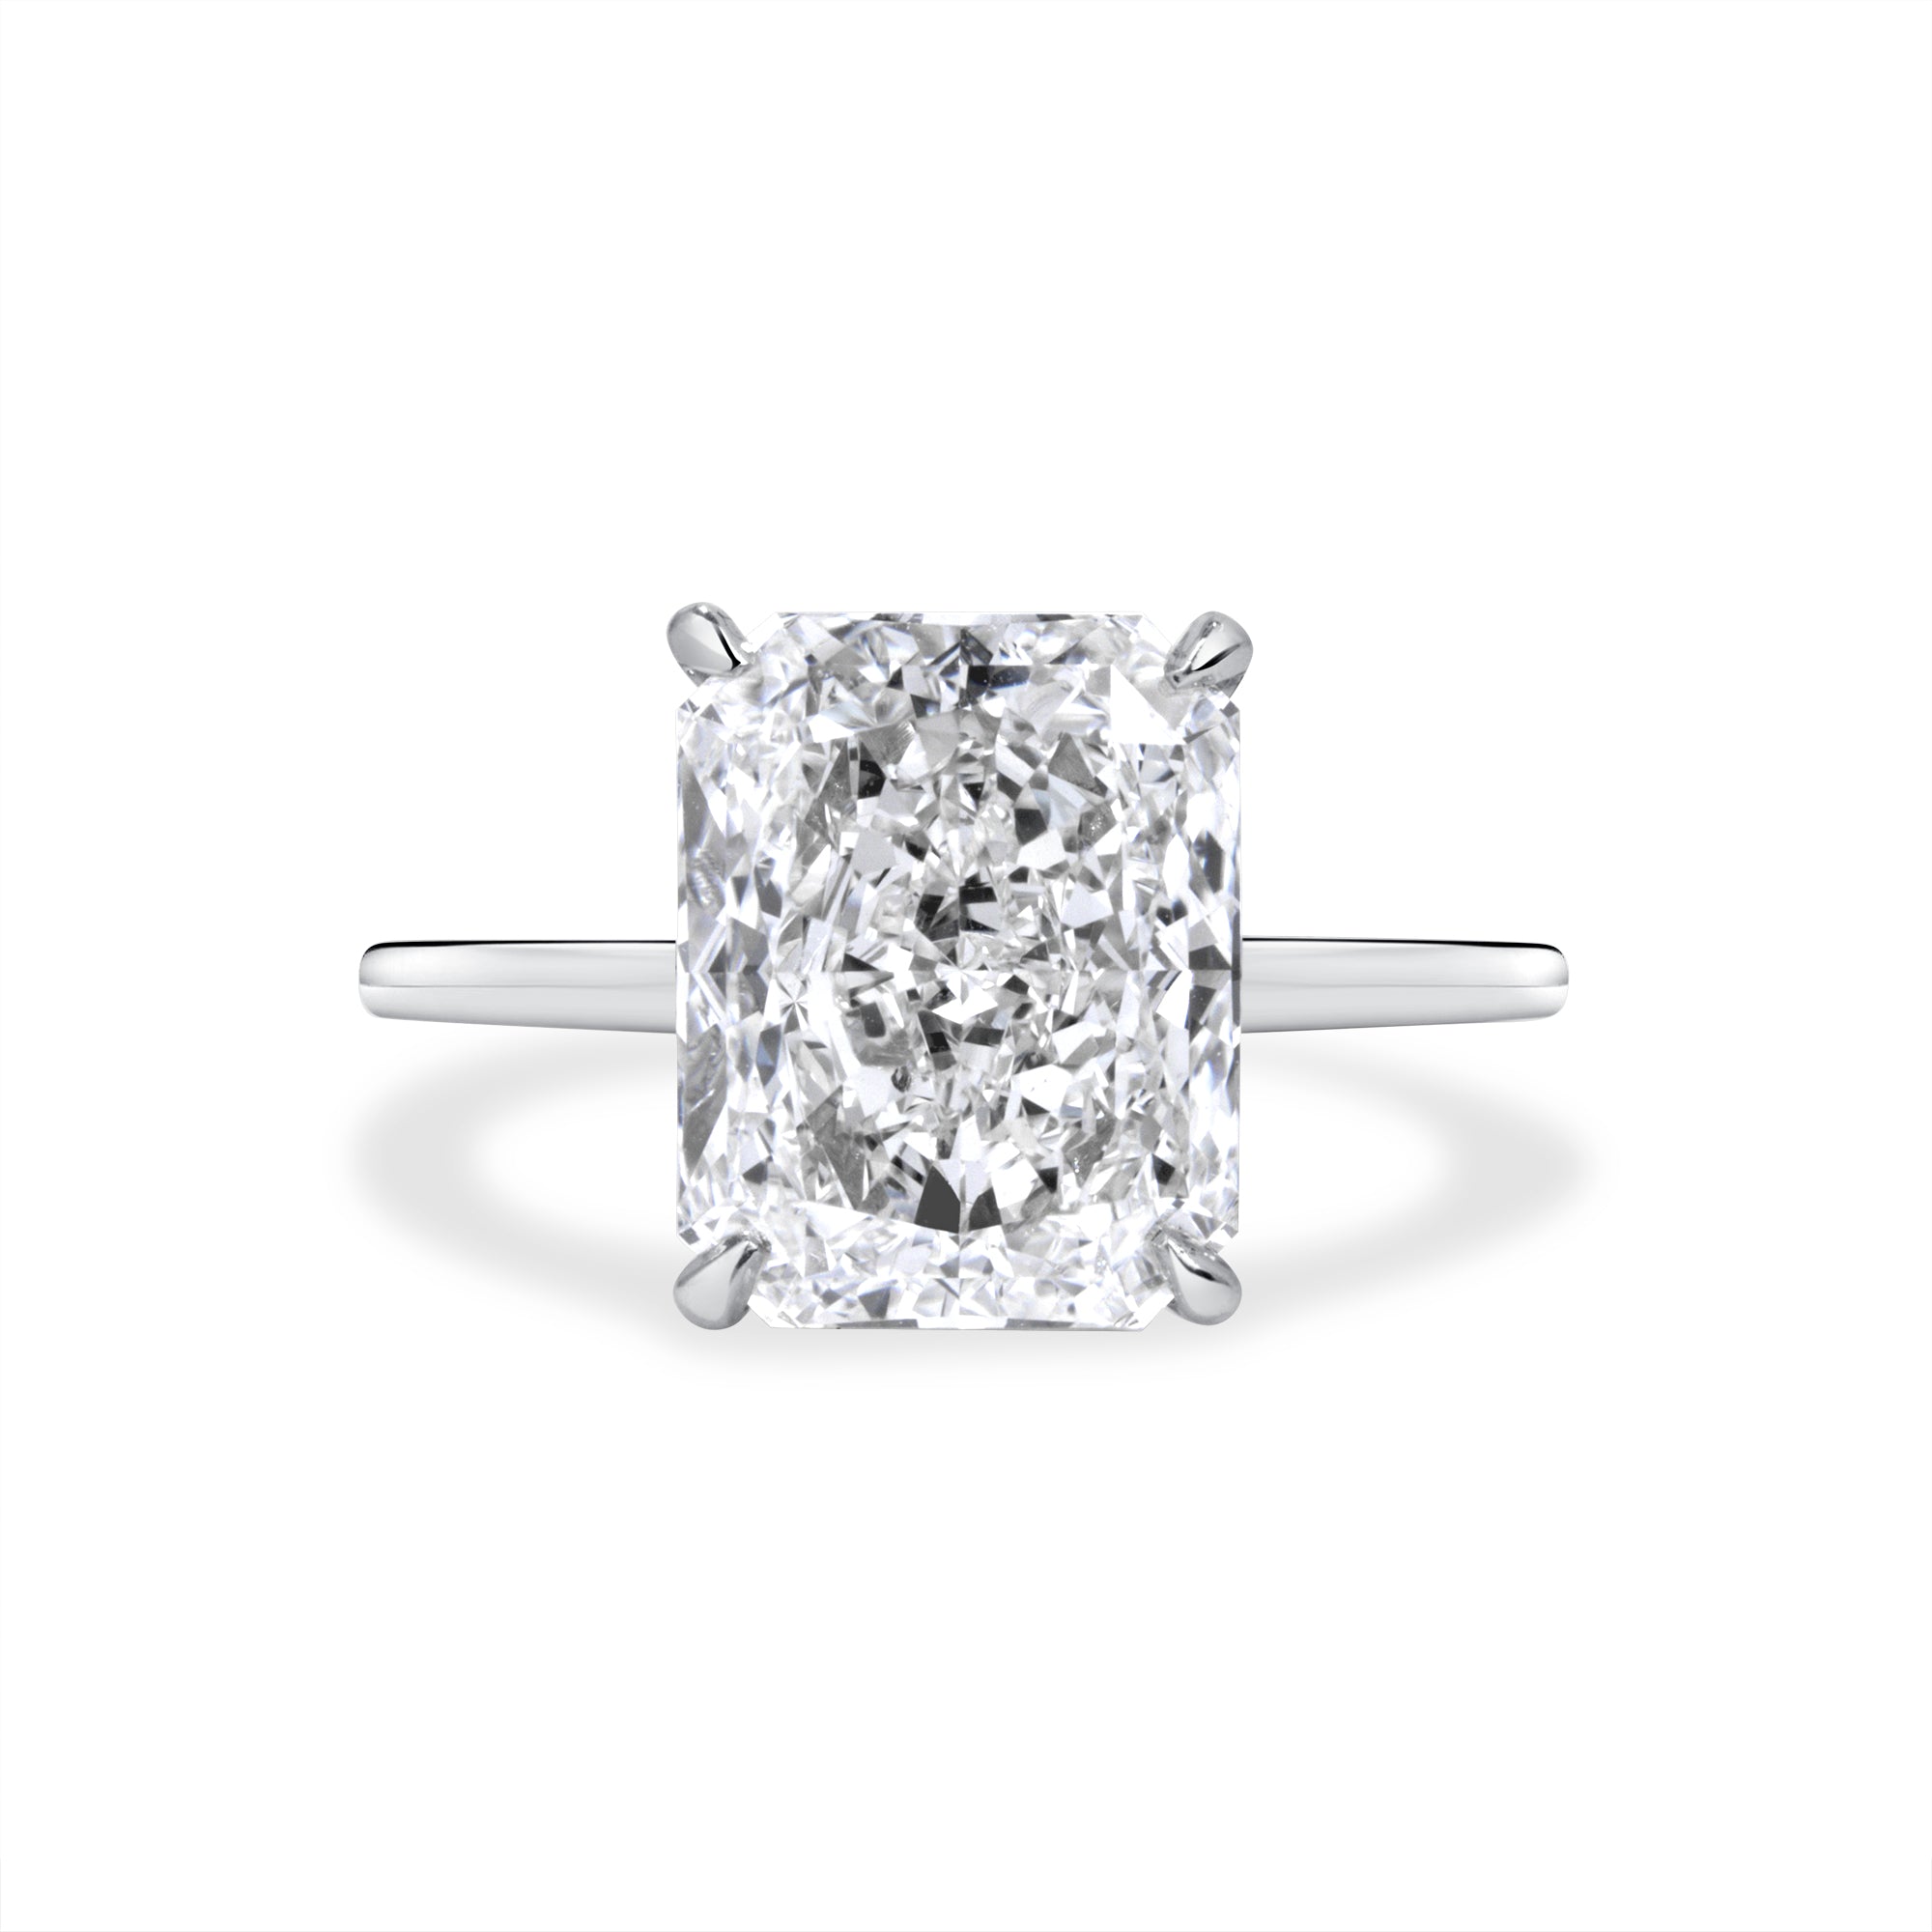 5.01ct Radiant Cut Diamond Solitaire Ring in Platinum Band, GIA Certified